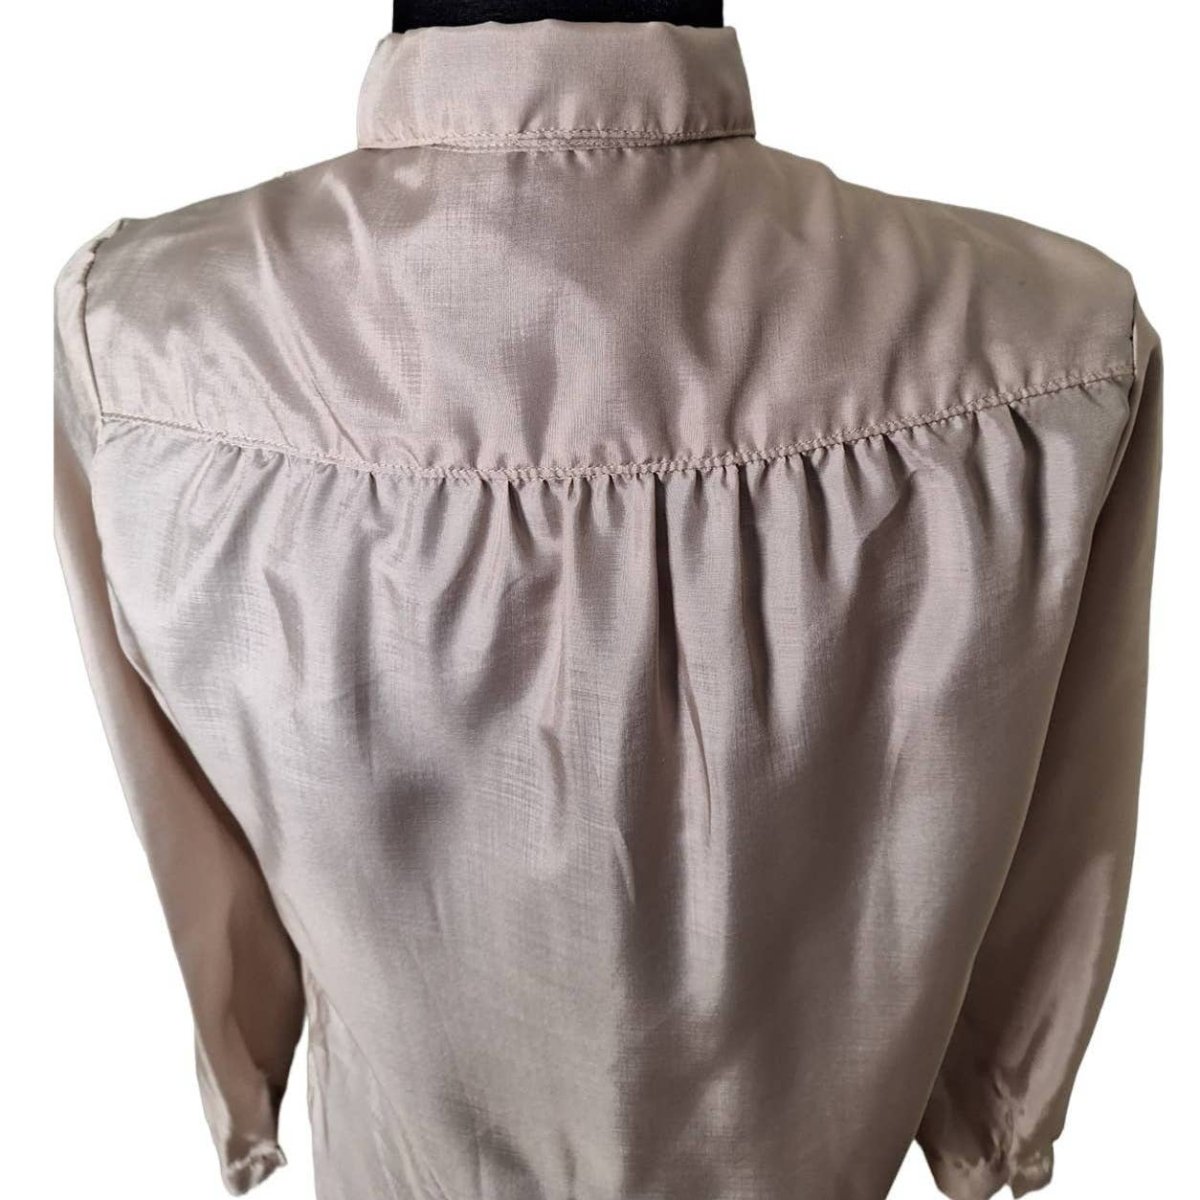 70s/80s Muted Gold Blouse Junior's Size 7/8 Women XS/S - themallvintage The Mall Vintage